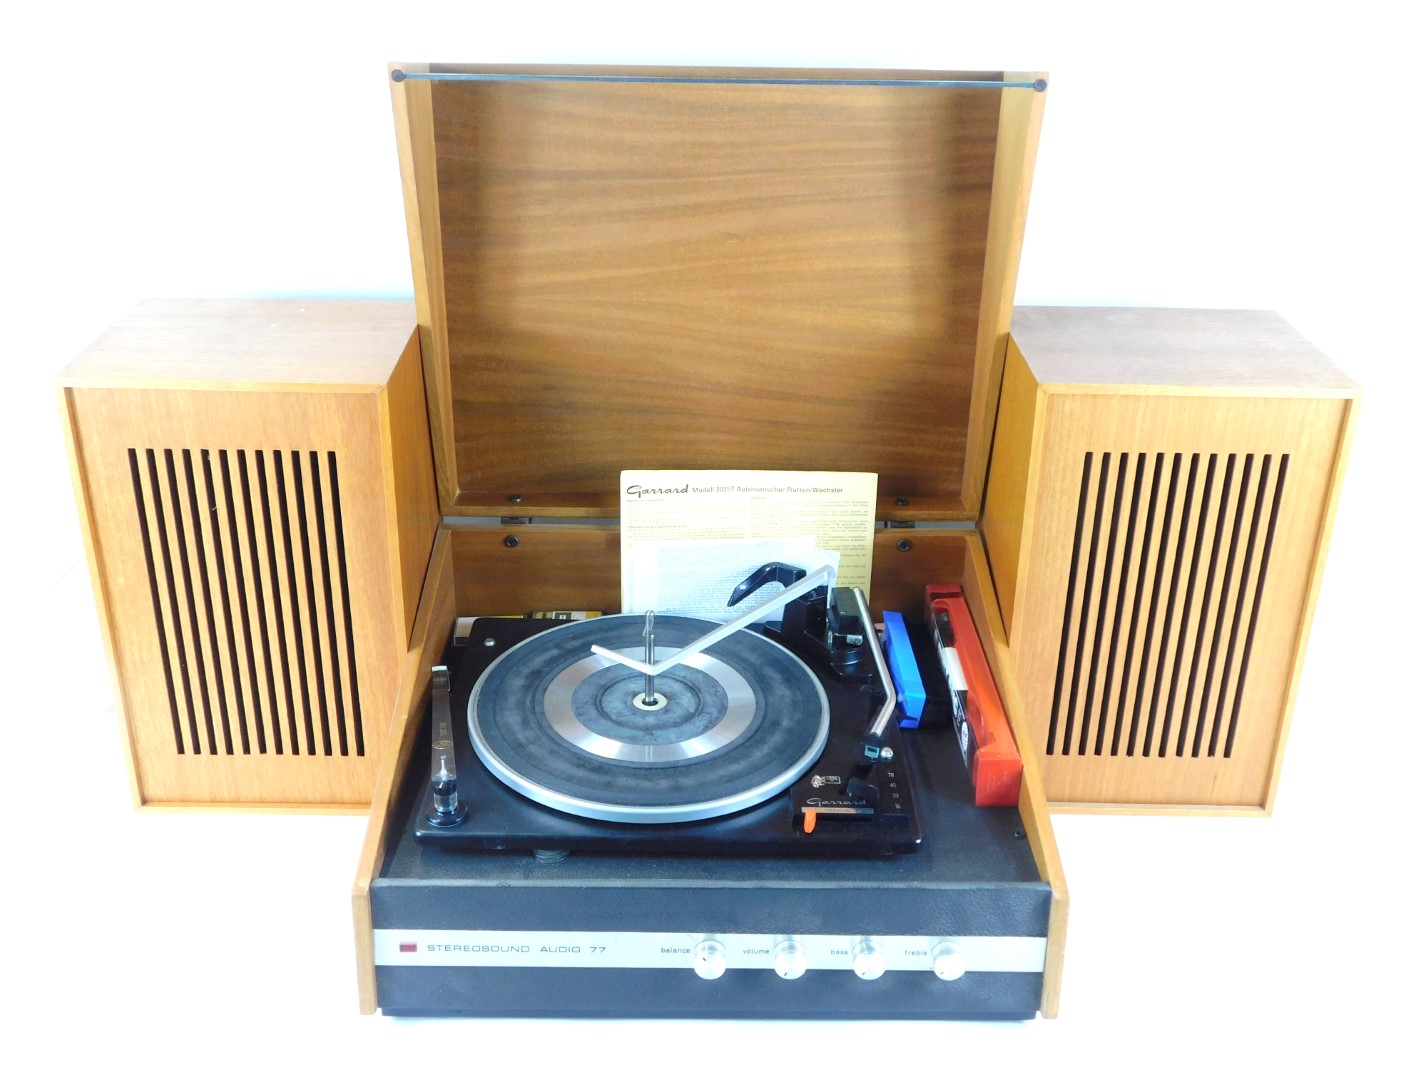 A Garrard automatic turntable, model 2025T, with stereo sound audio 77, and a pair of speakers.